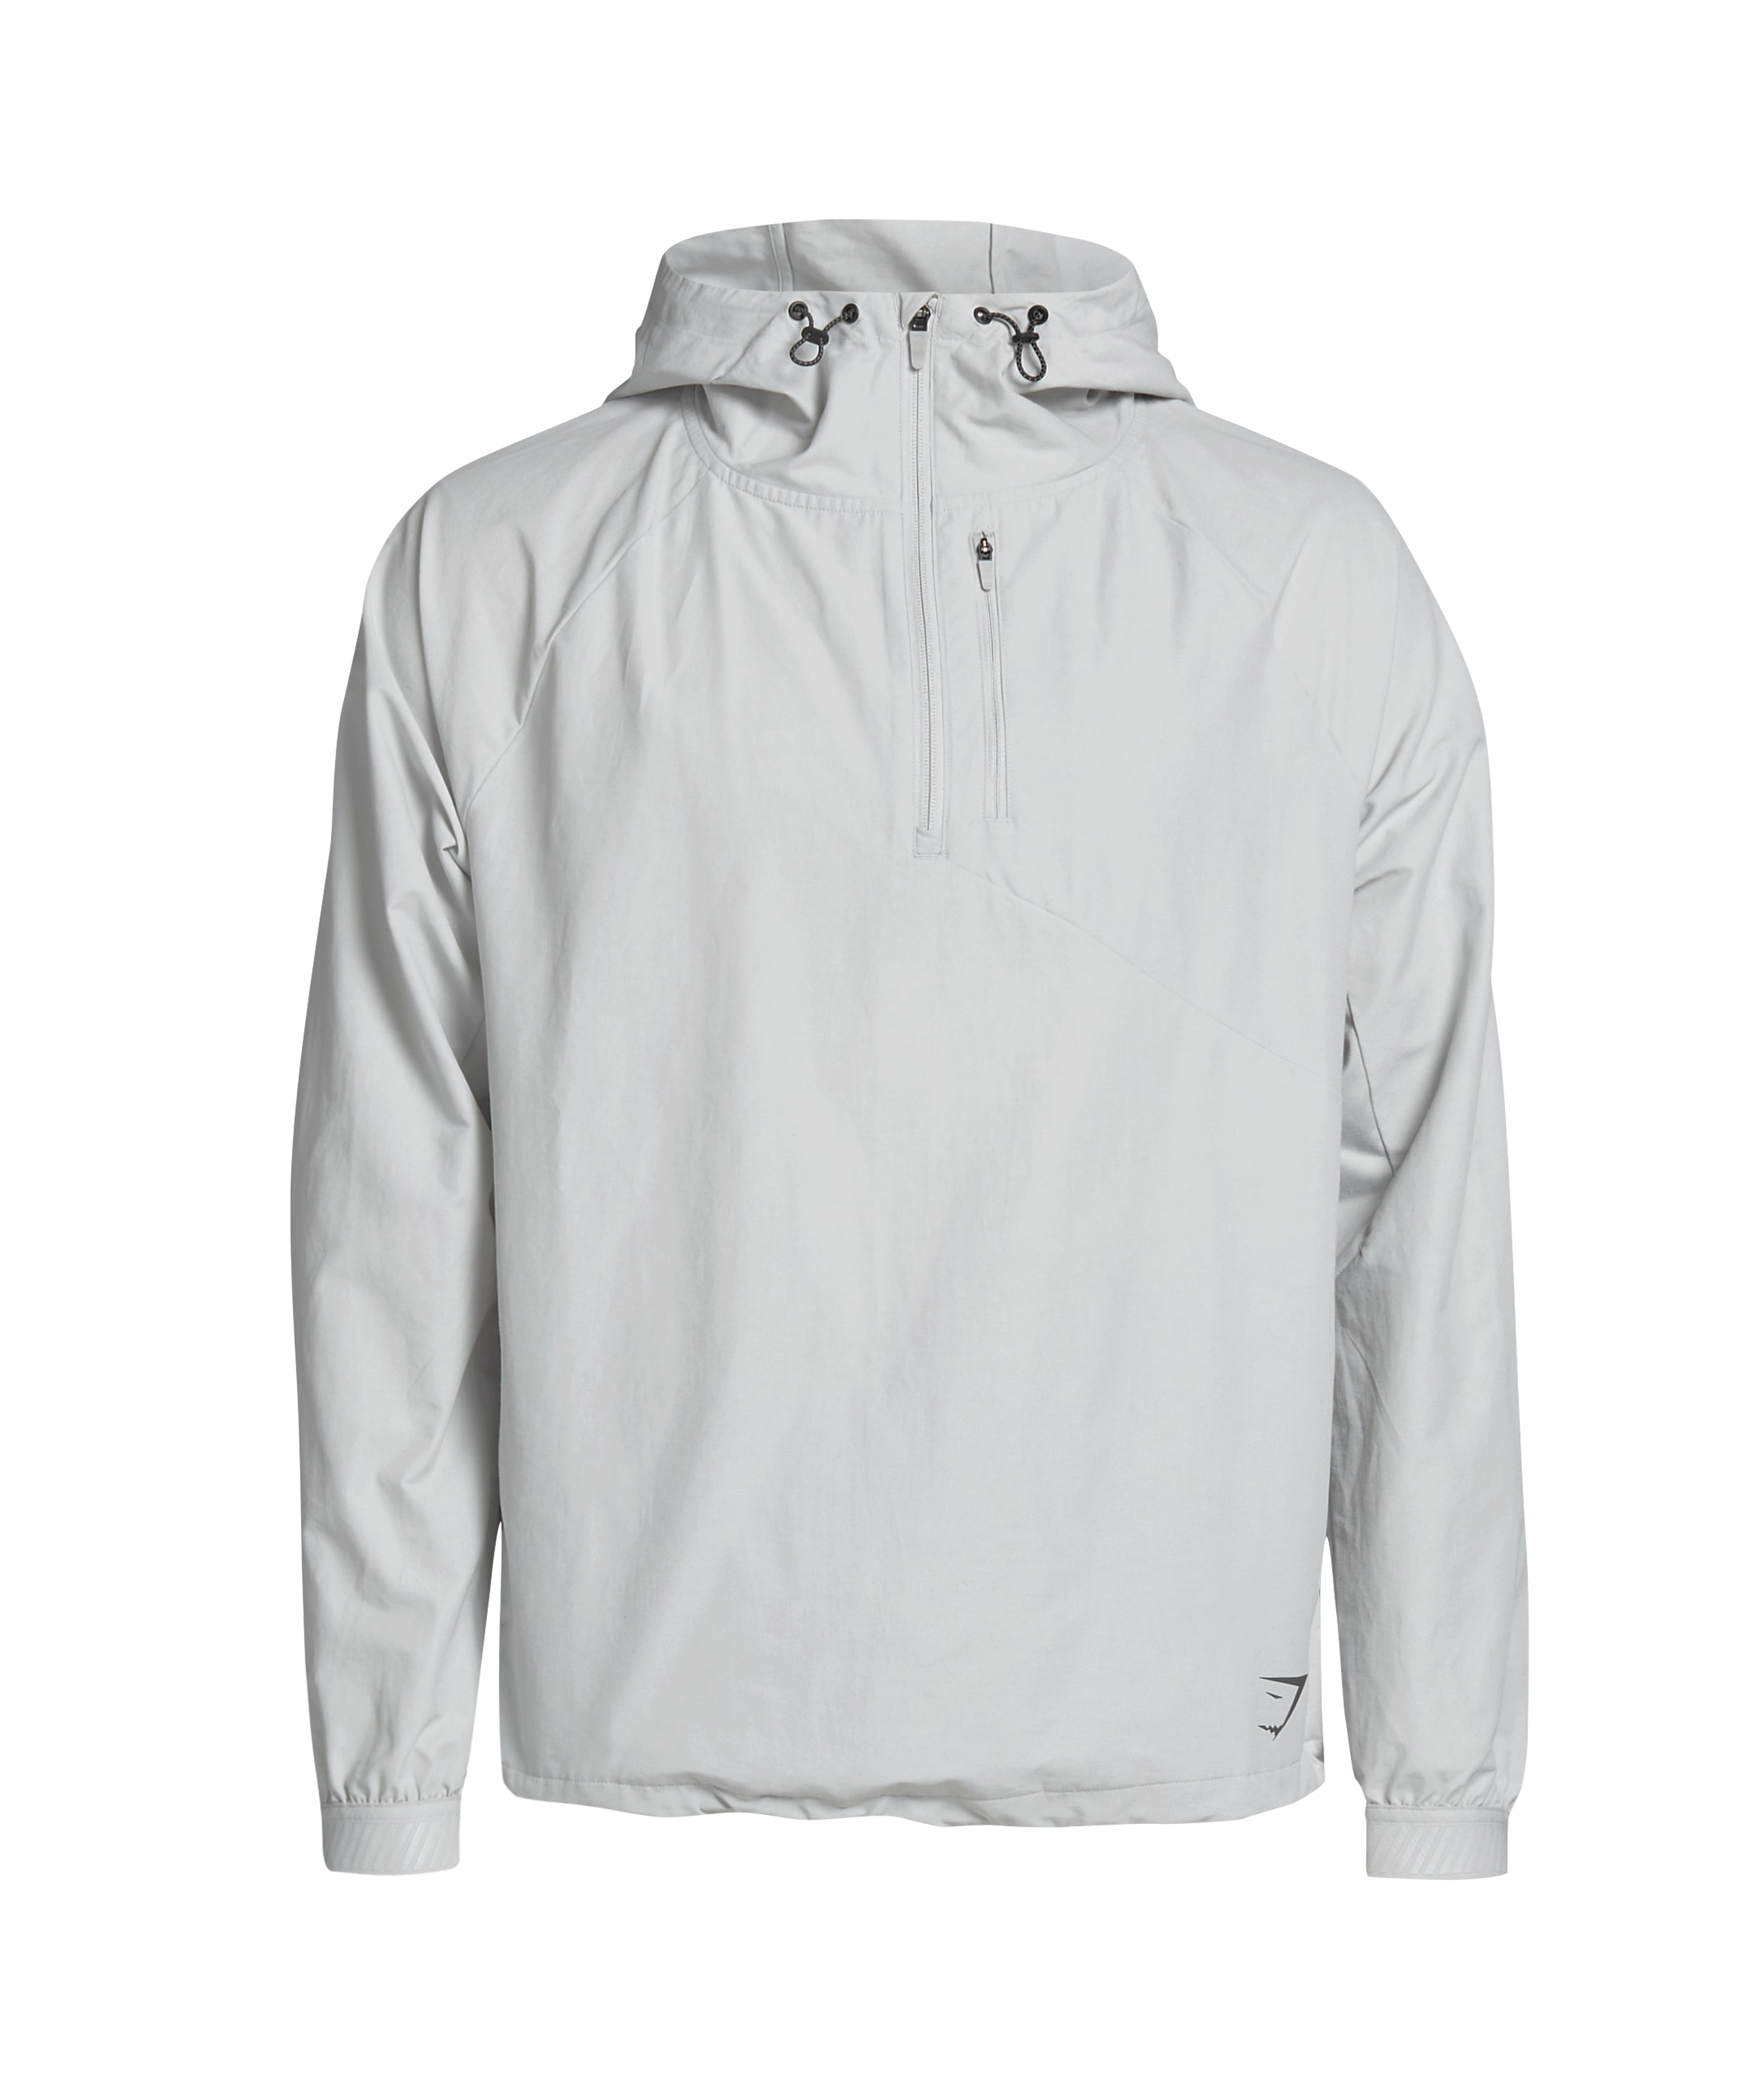 Apex Jacket in Light Grey - view 8